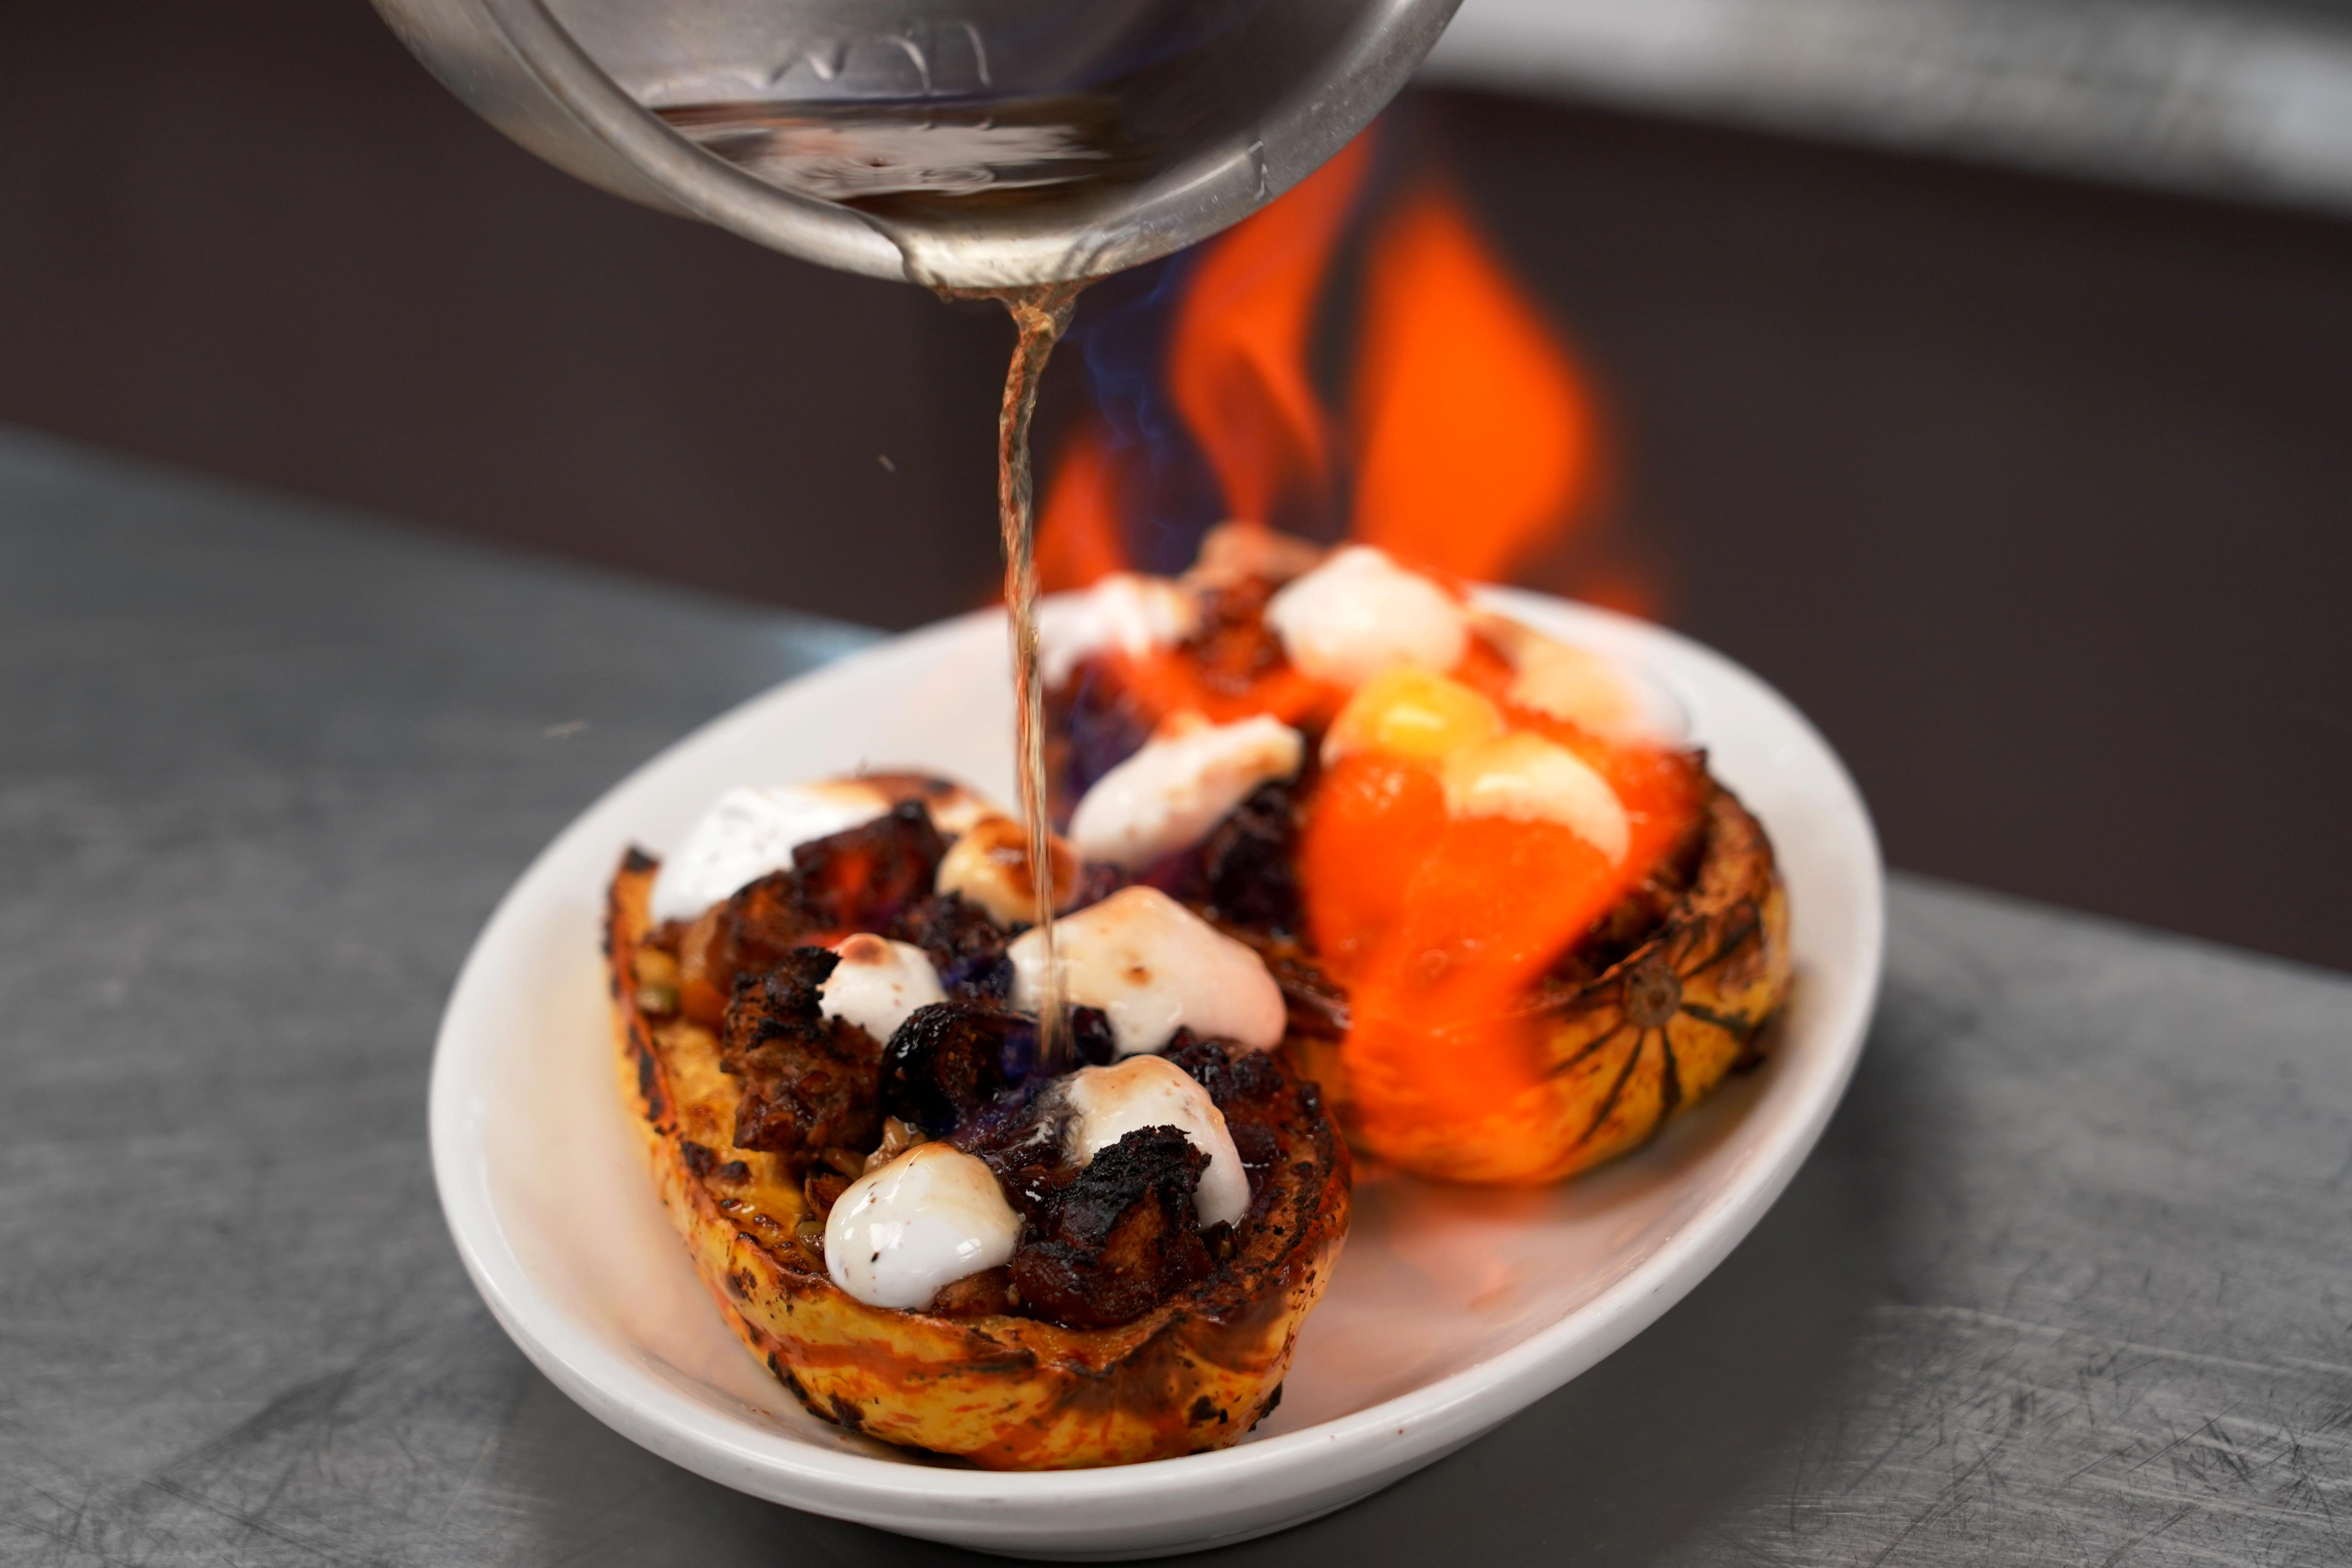 Flaming liquid is poured onto a stuffed squash on a white plate